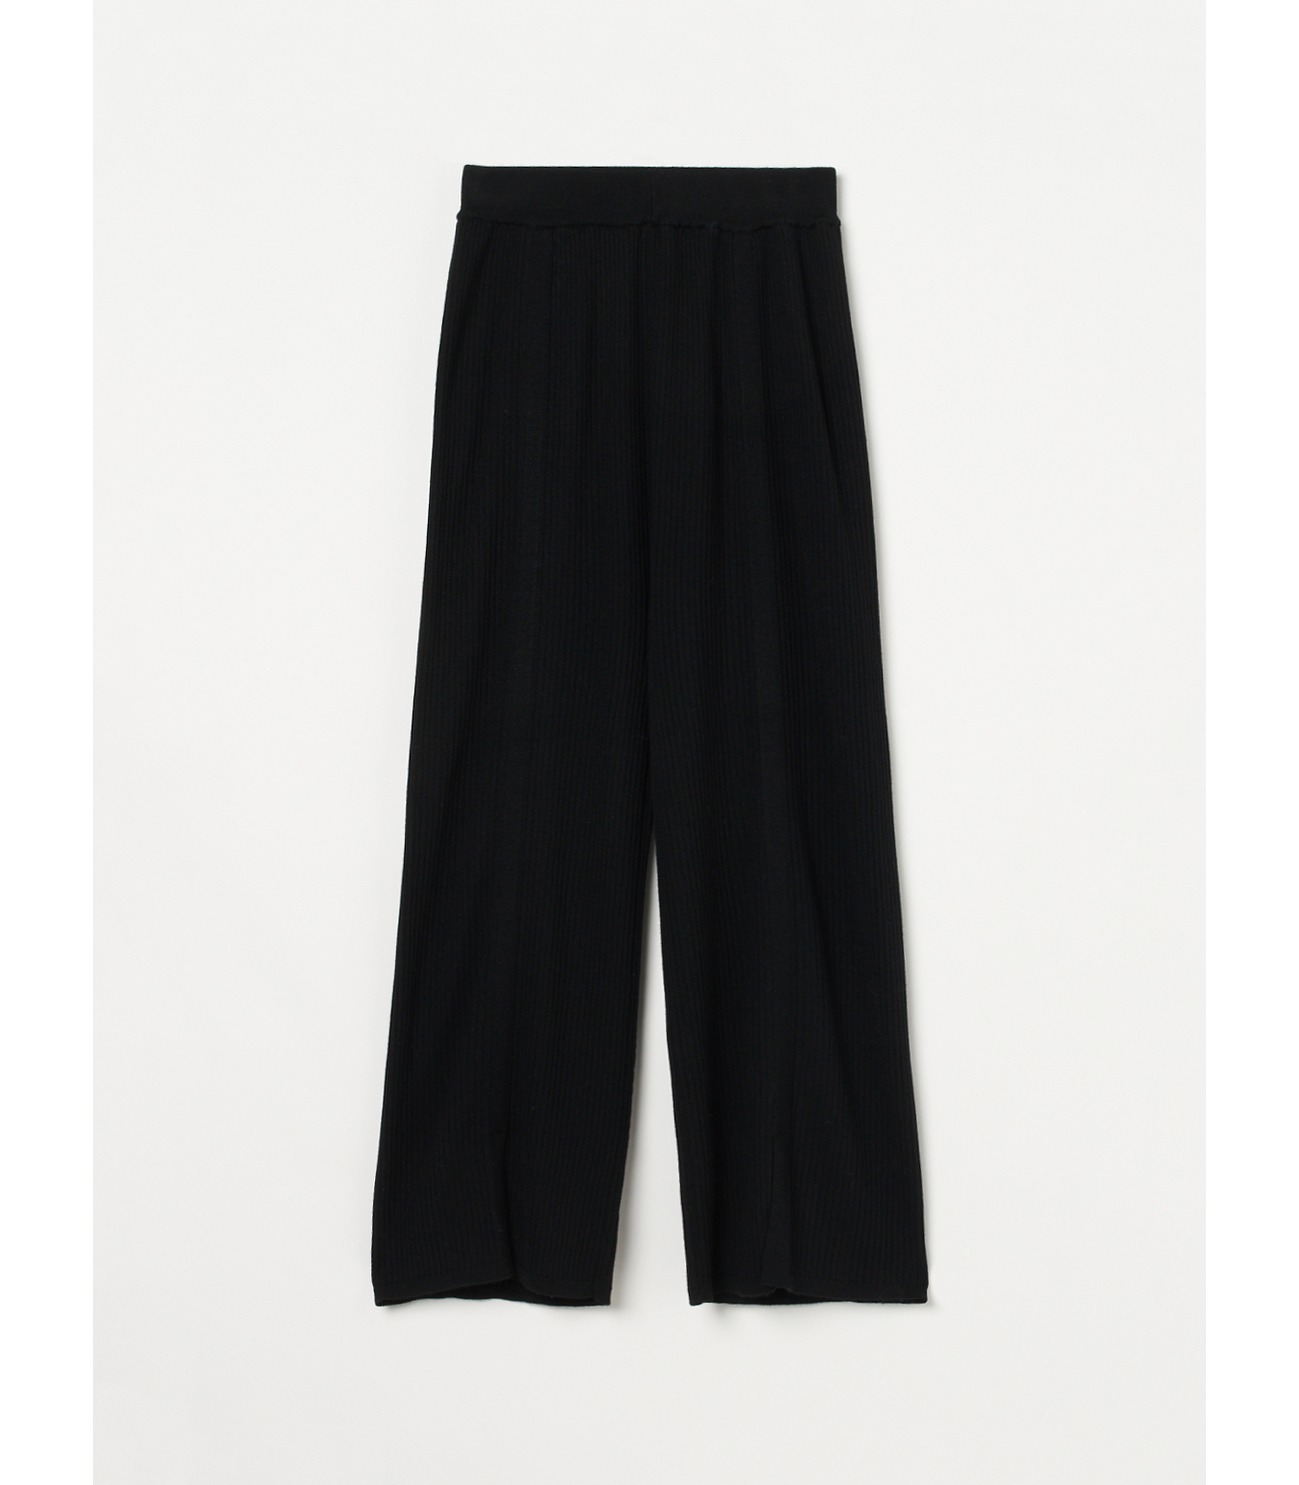 Wool outfit semi wide slit pant 詳細画像 black 1